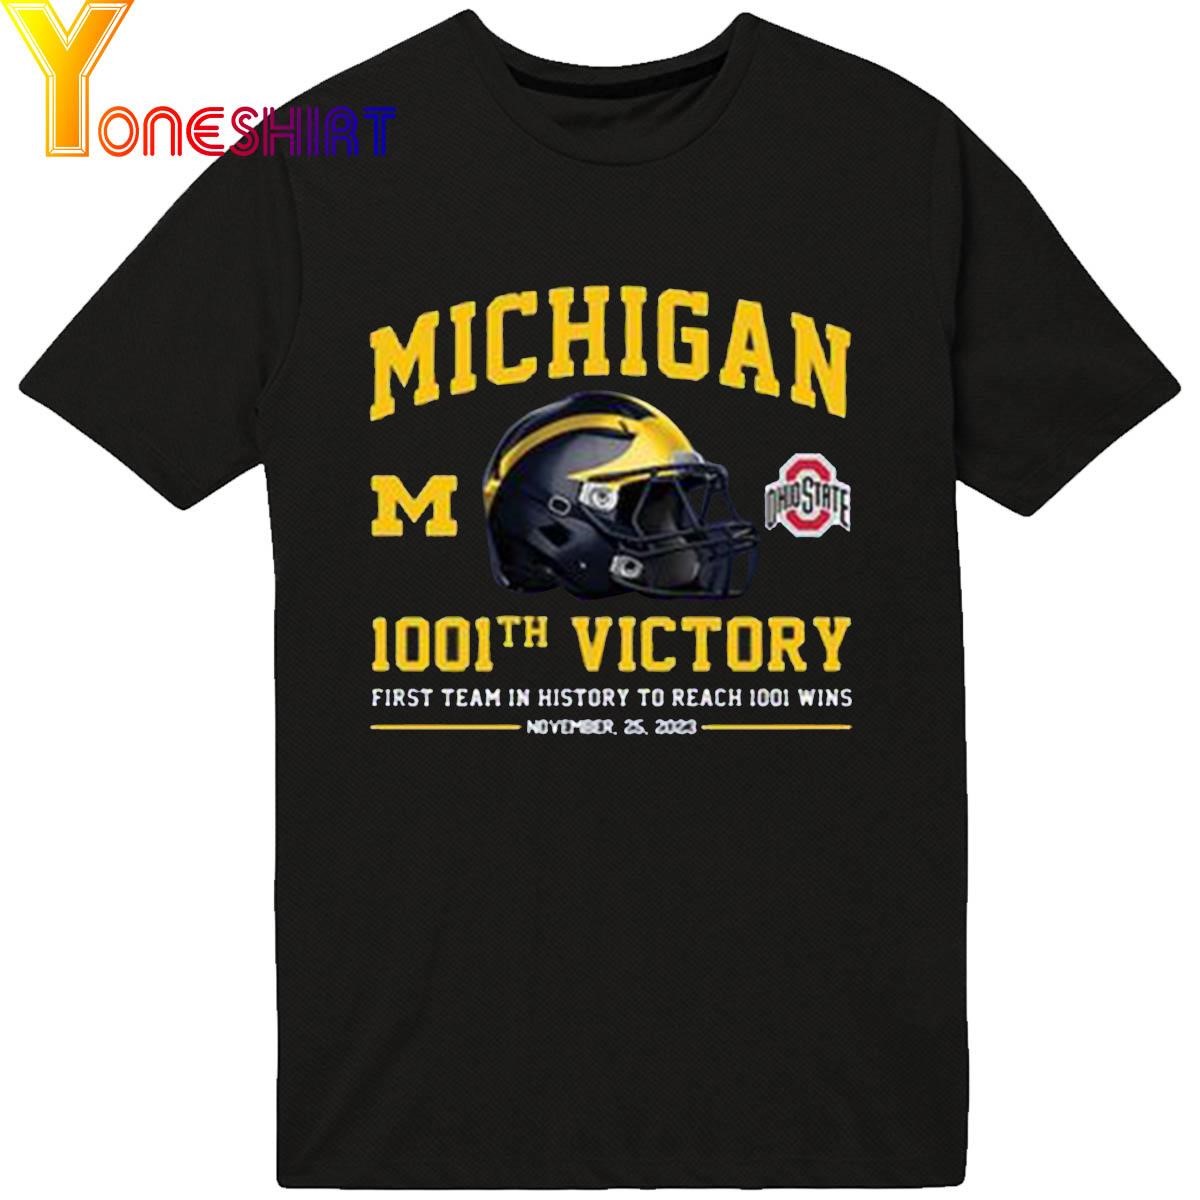 Michigan 1001th Victory First team in history to reach 1001 wins November 25 2023 Shirt